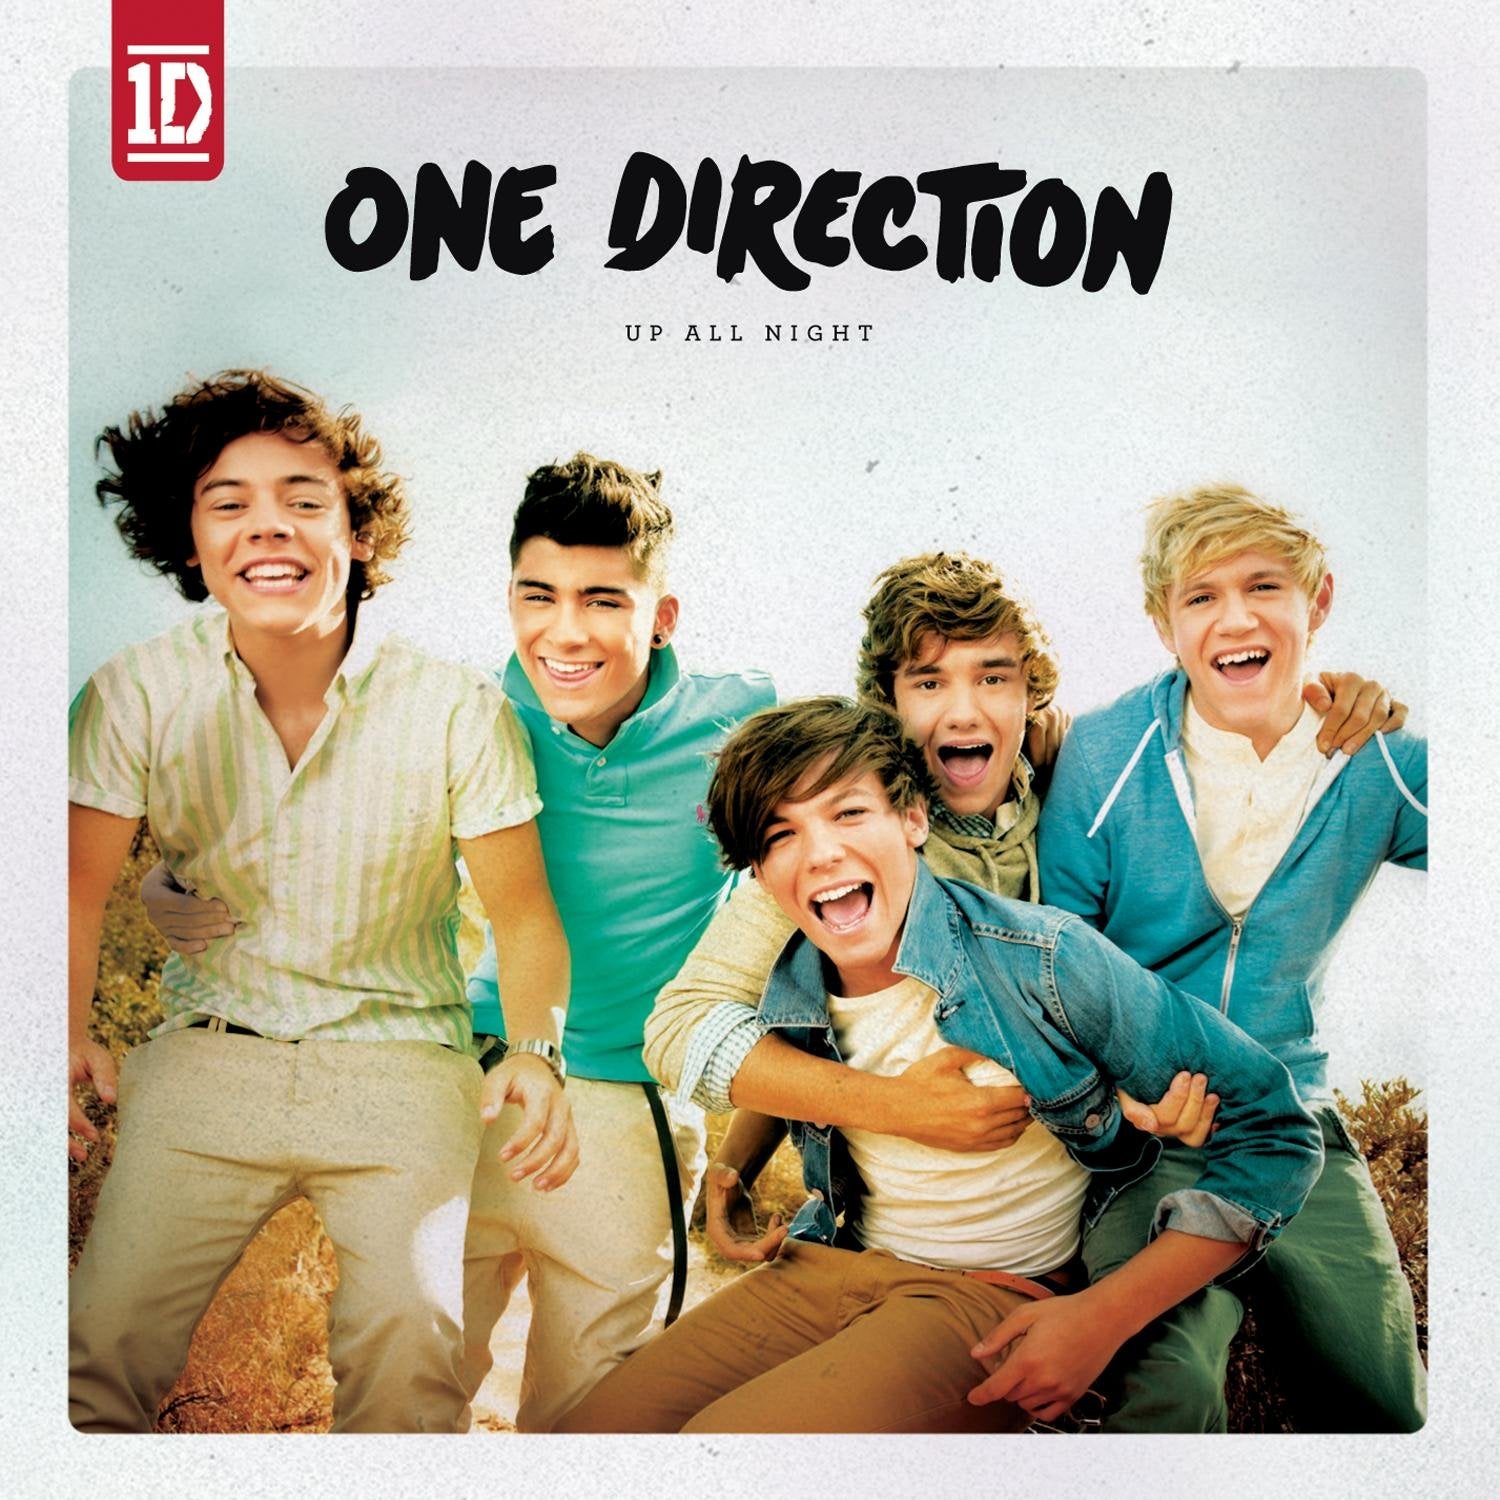 CD One direction - Up all night